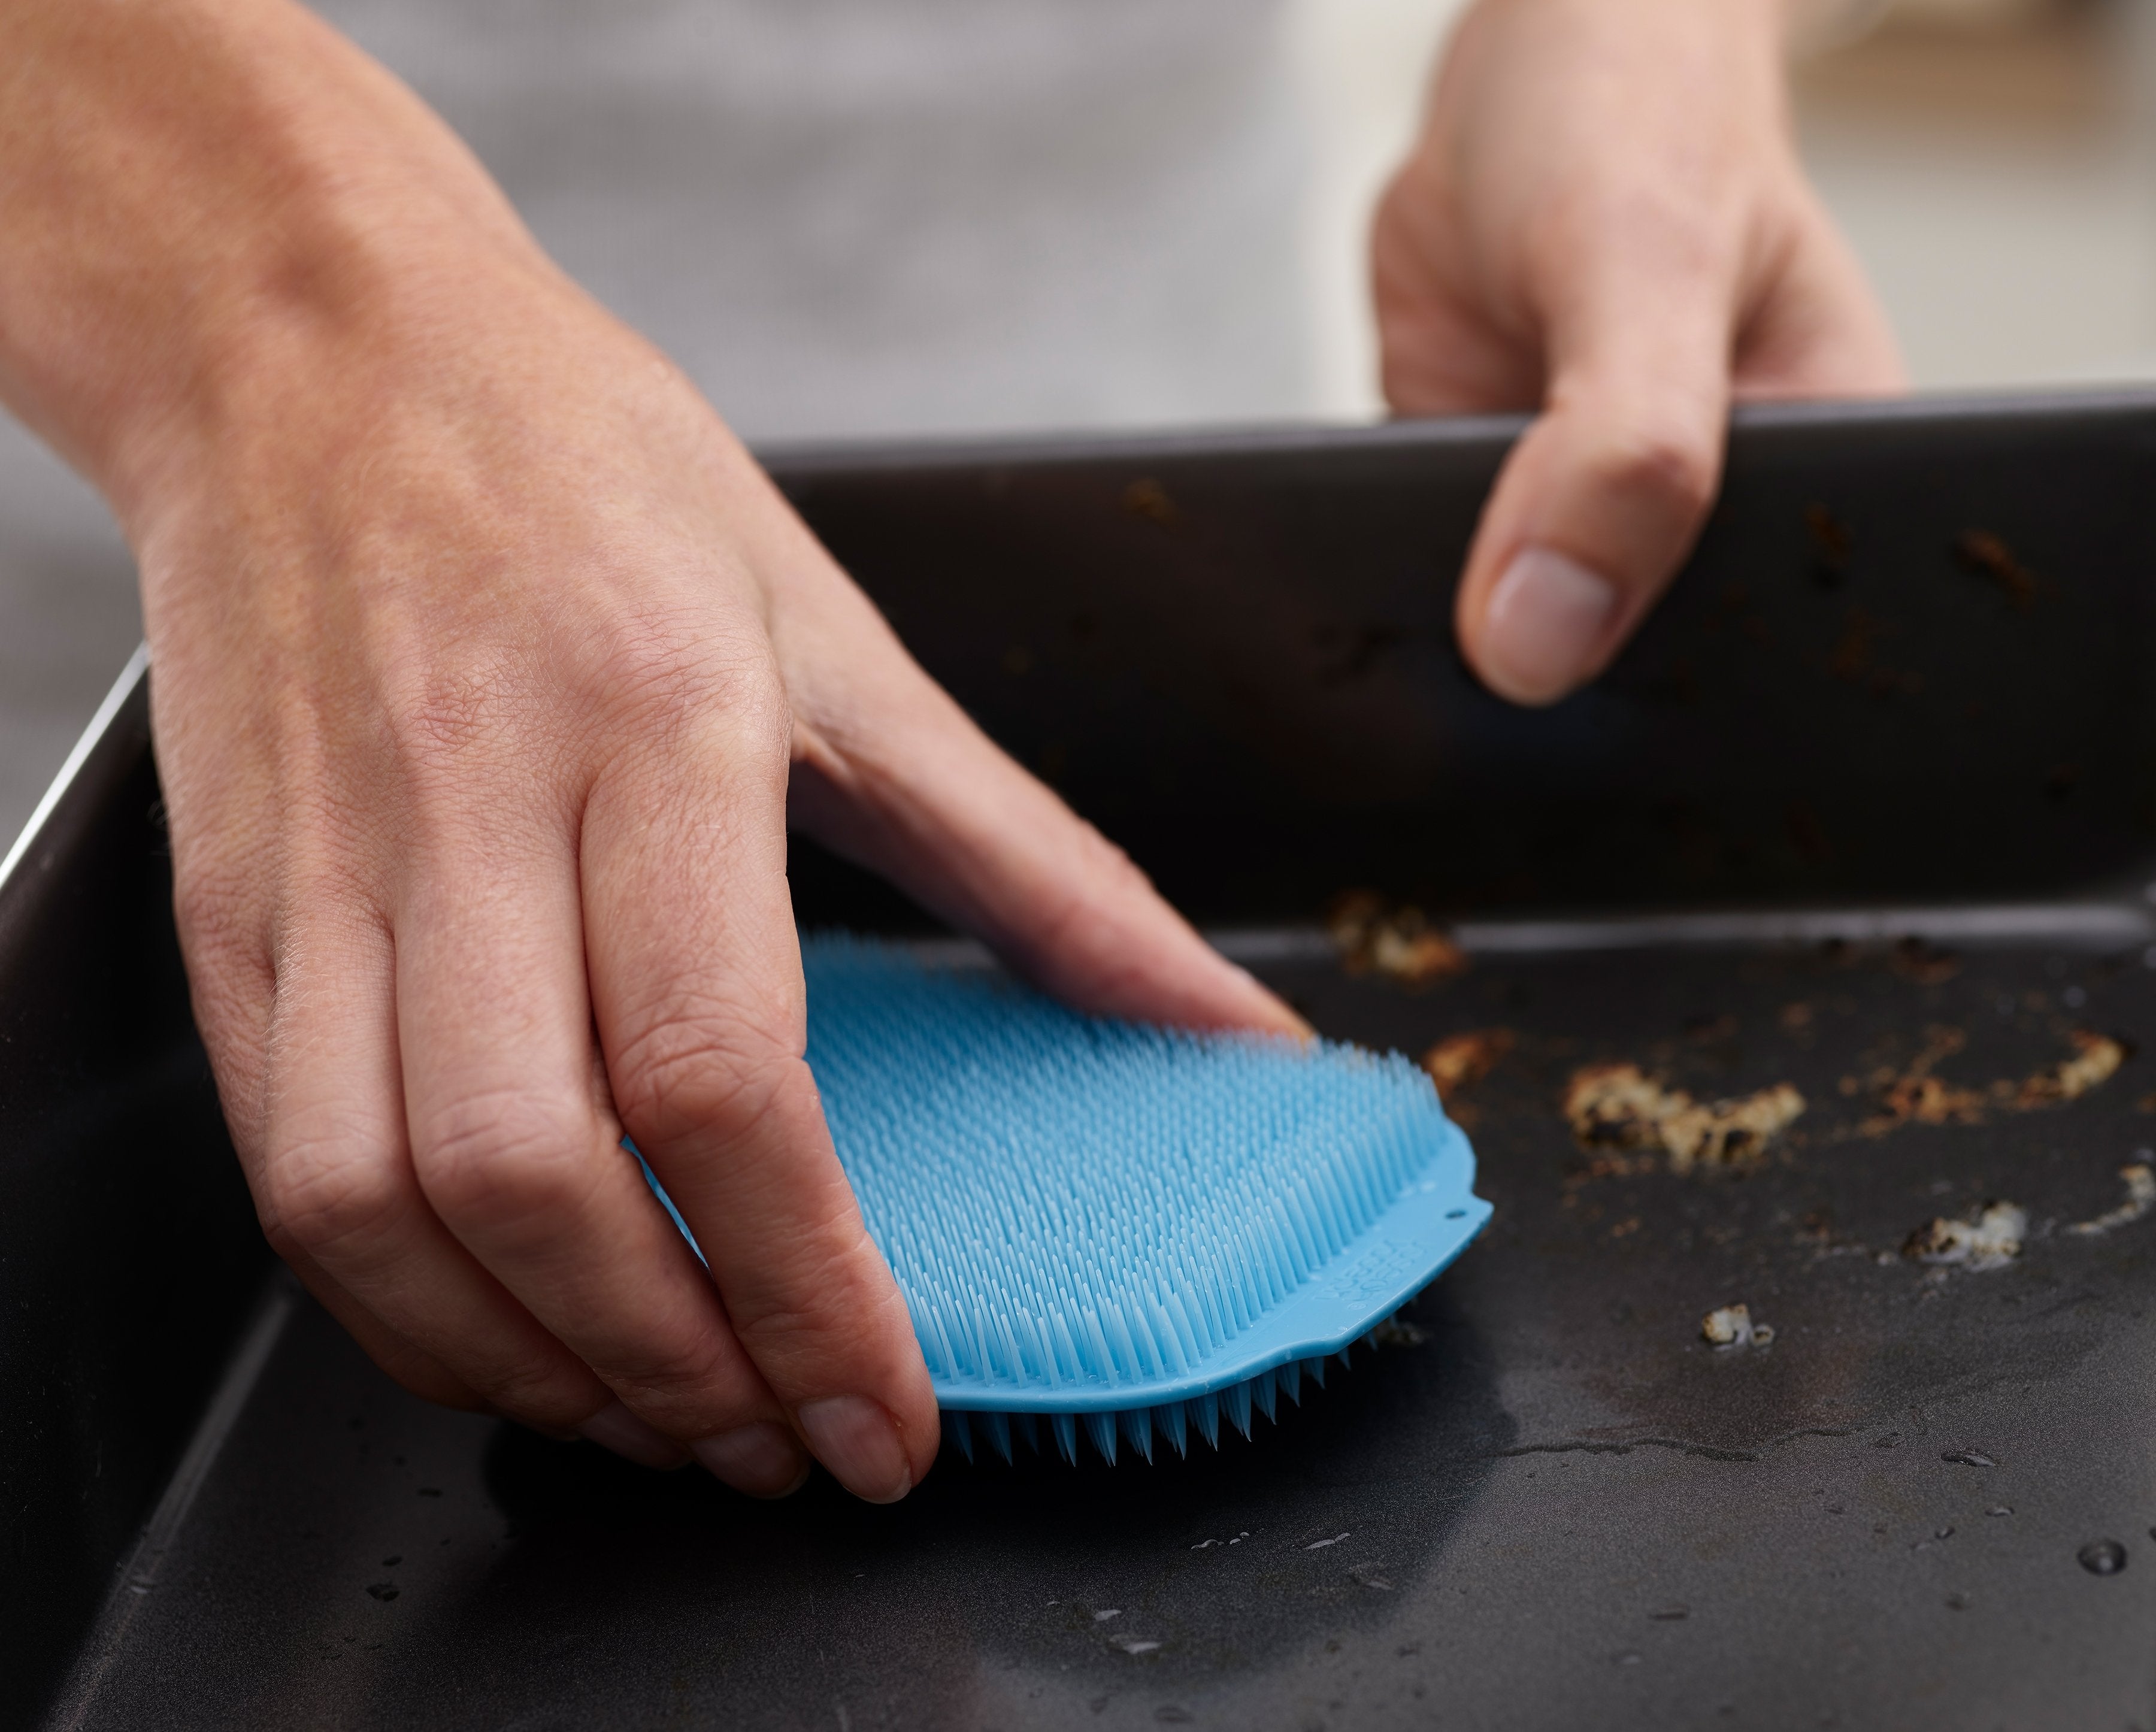 BEON.COM.AU  One side of this flexible scrubber has fine bristles for gentle cleaning tasks while the other has coarse bristles for tougher deposits, making it the perfect cleaning tool.  Quick drying Stiff bristles for effective cleaning Safe on non-stick cookware Easy to rinse clean 100% recyclable Blue se... Joseph Joseph at BEON.COM.AU